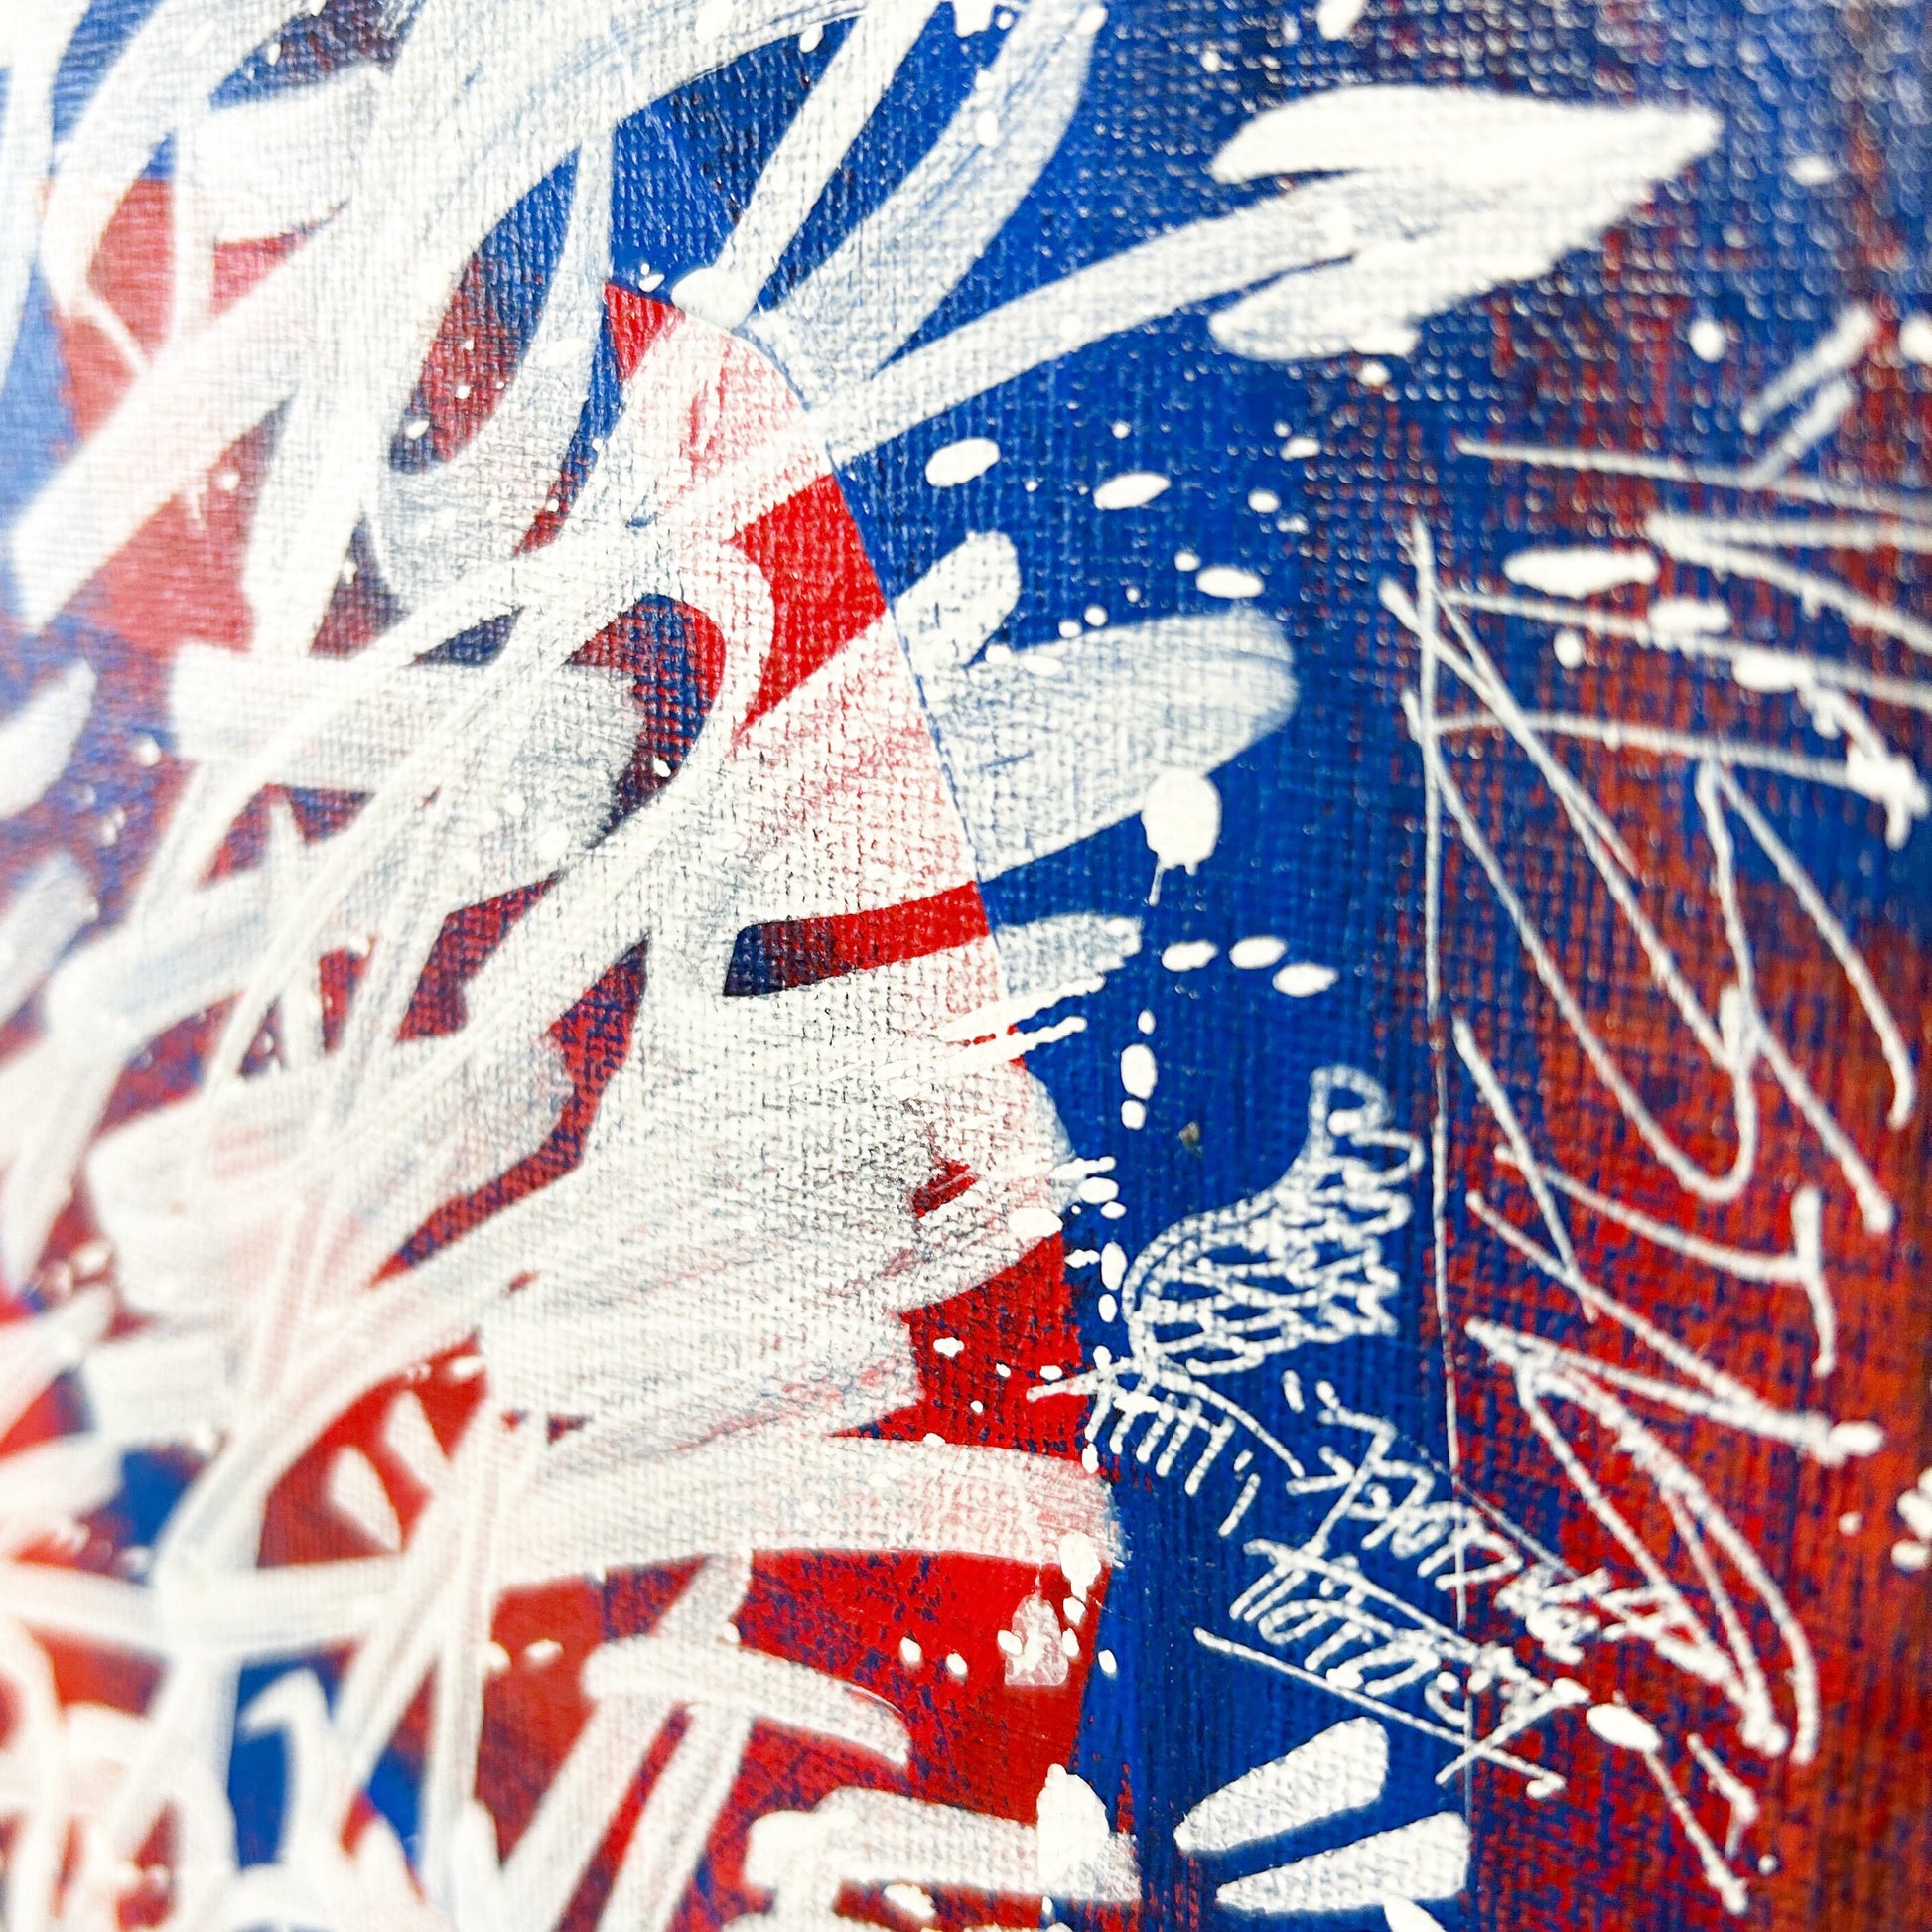 A further zoomed-in photo of the painting. This close-up shot captures the texture of the canvas, with lyrics written in white against a blue and red background.